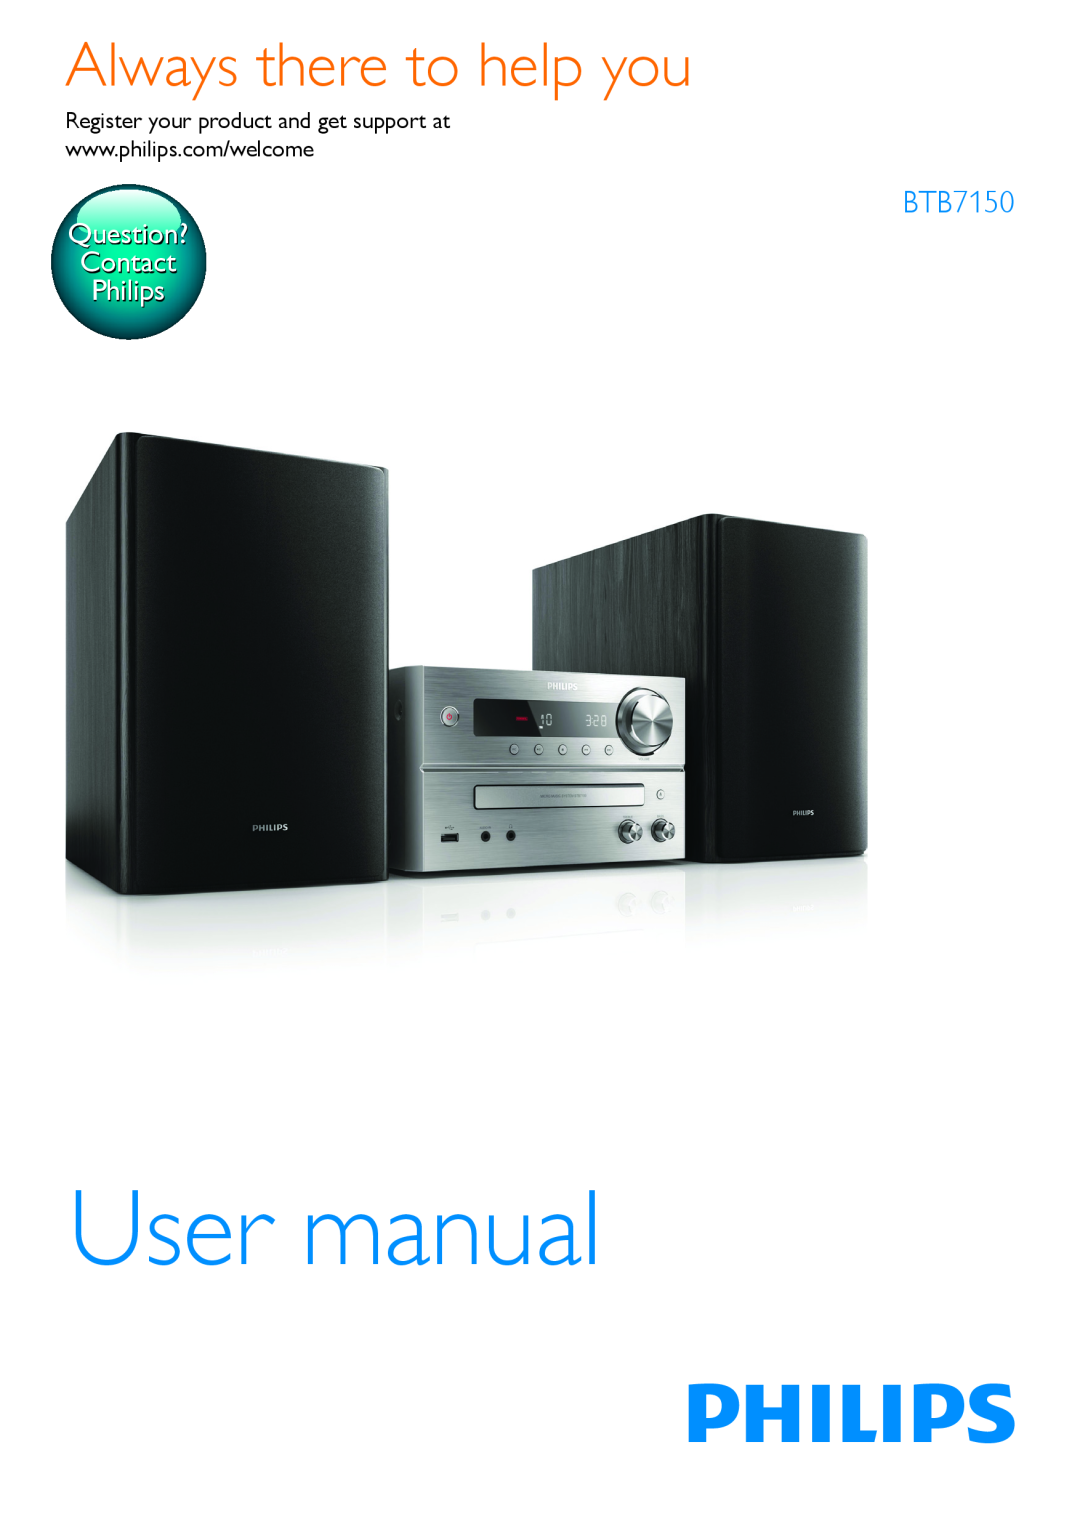 Philips BTB7150 user manual Always there to help you, Question? Contact Philips 